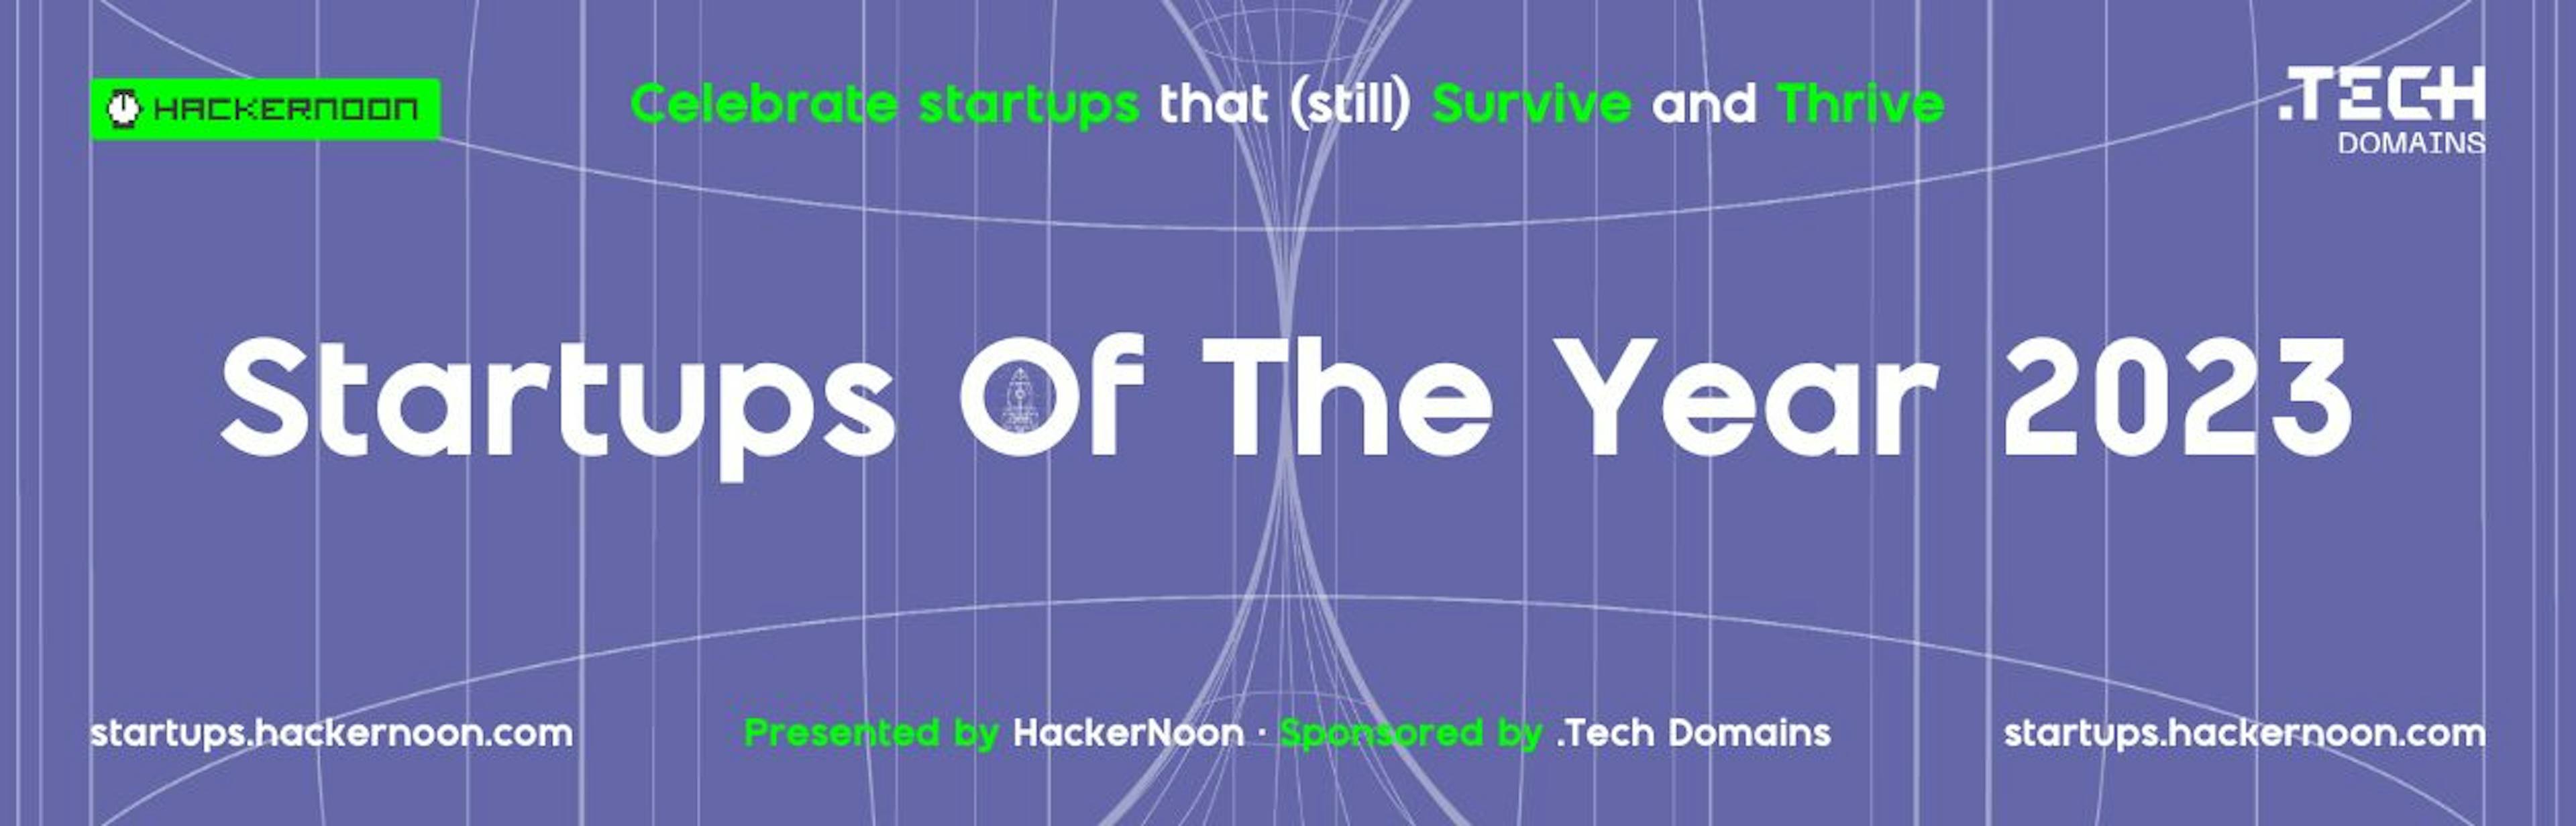 /startups-of-the-year-2023-nominations-and-voting-now-open feature image